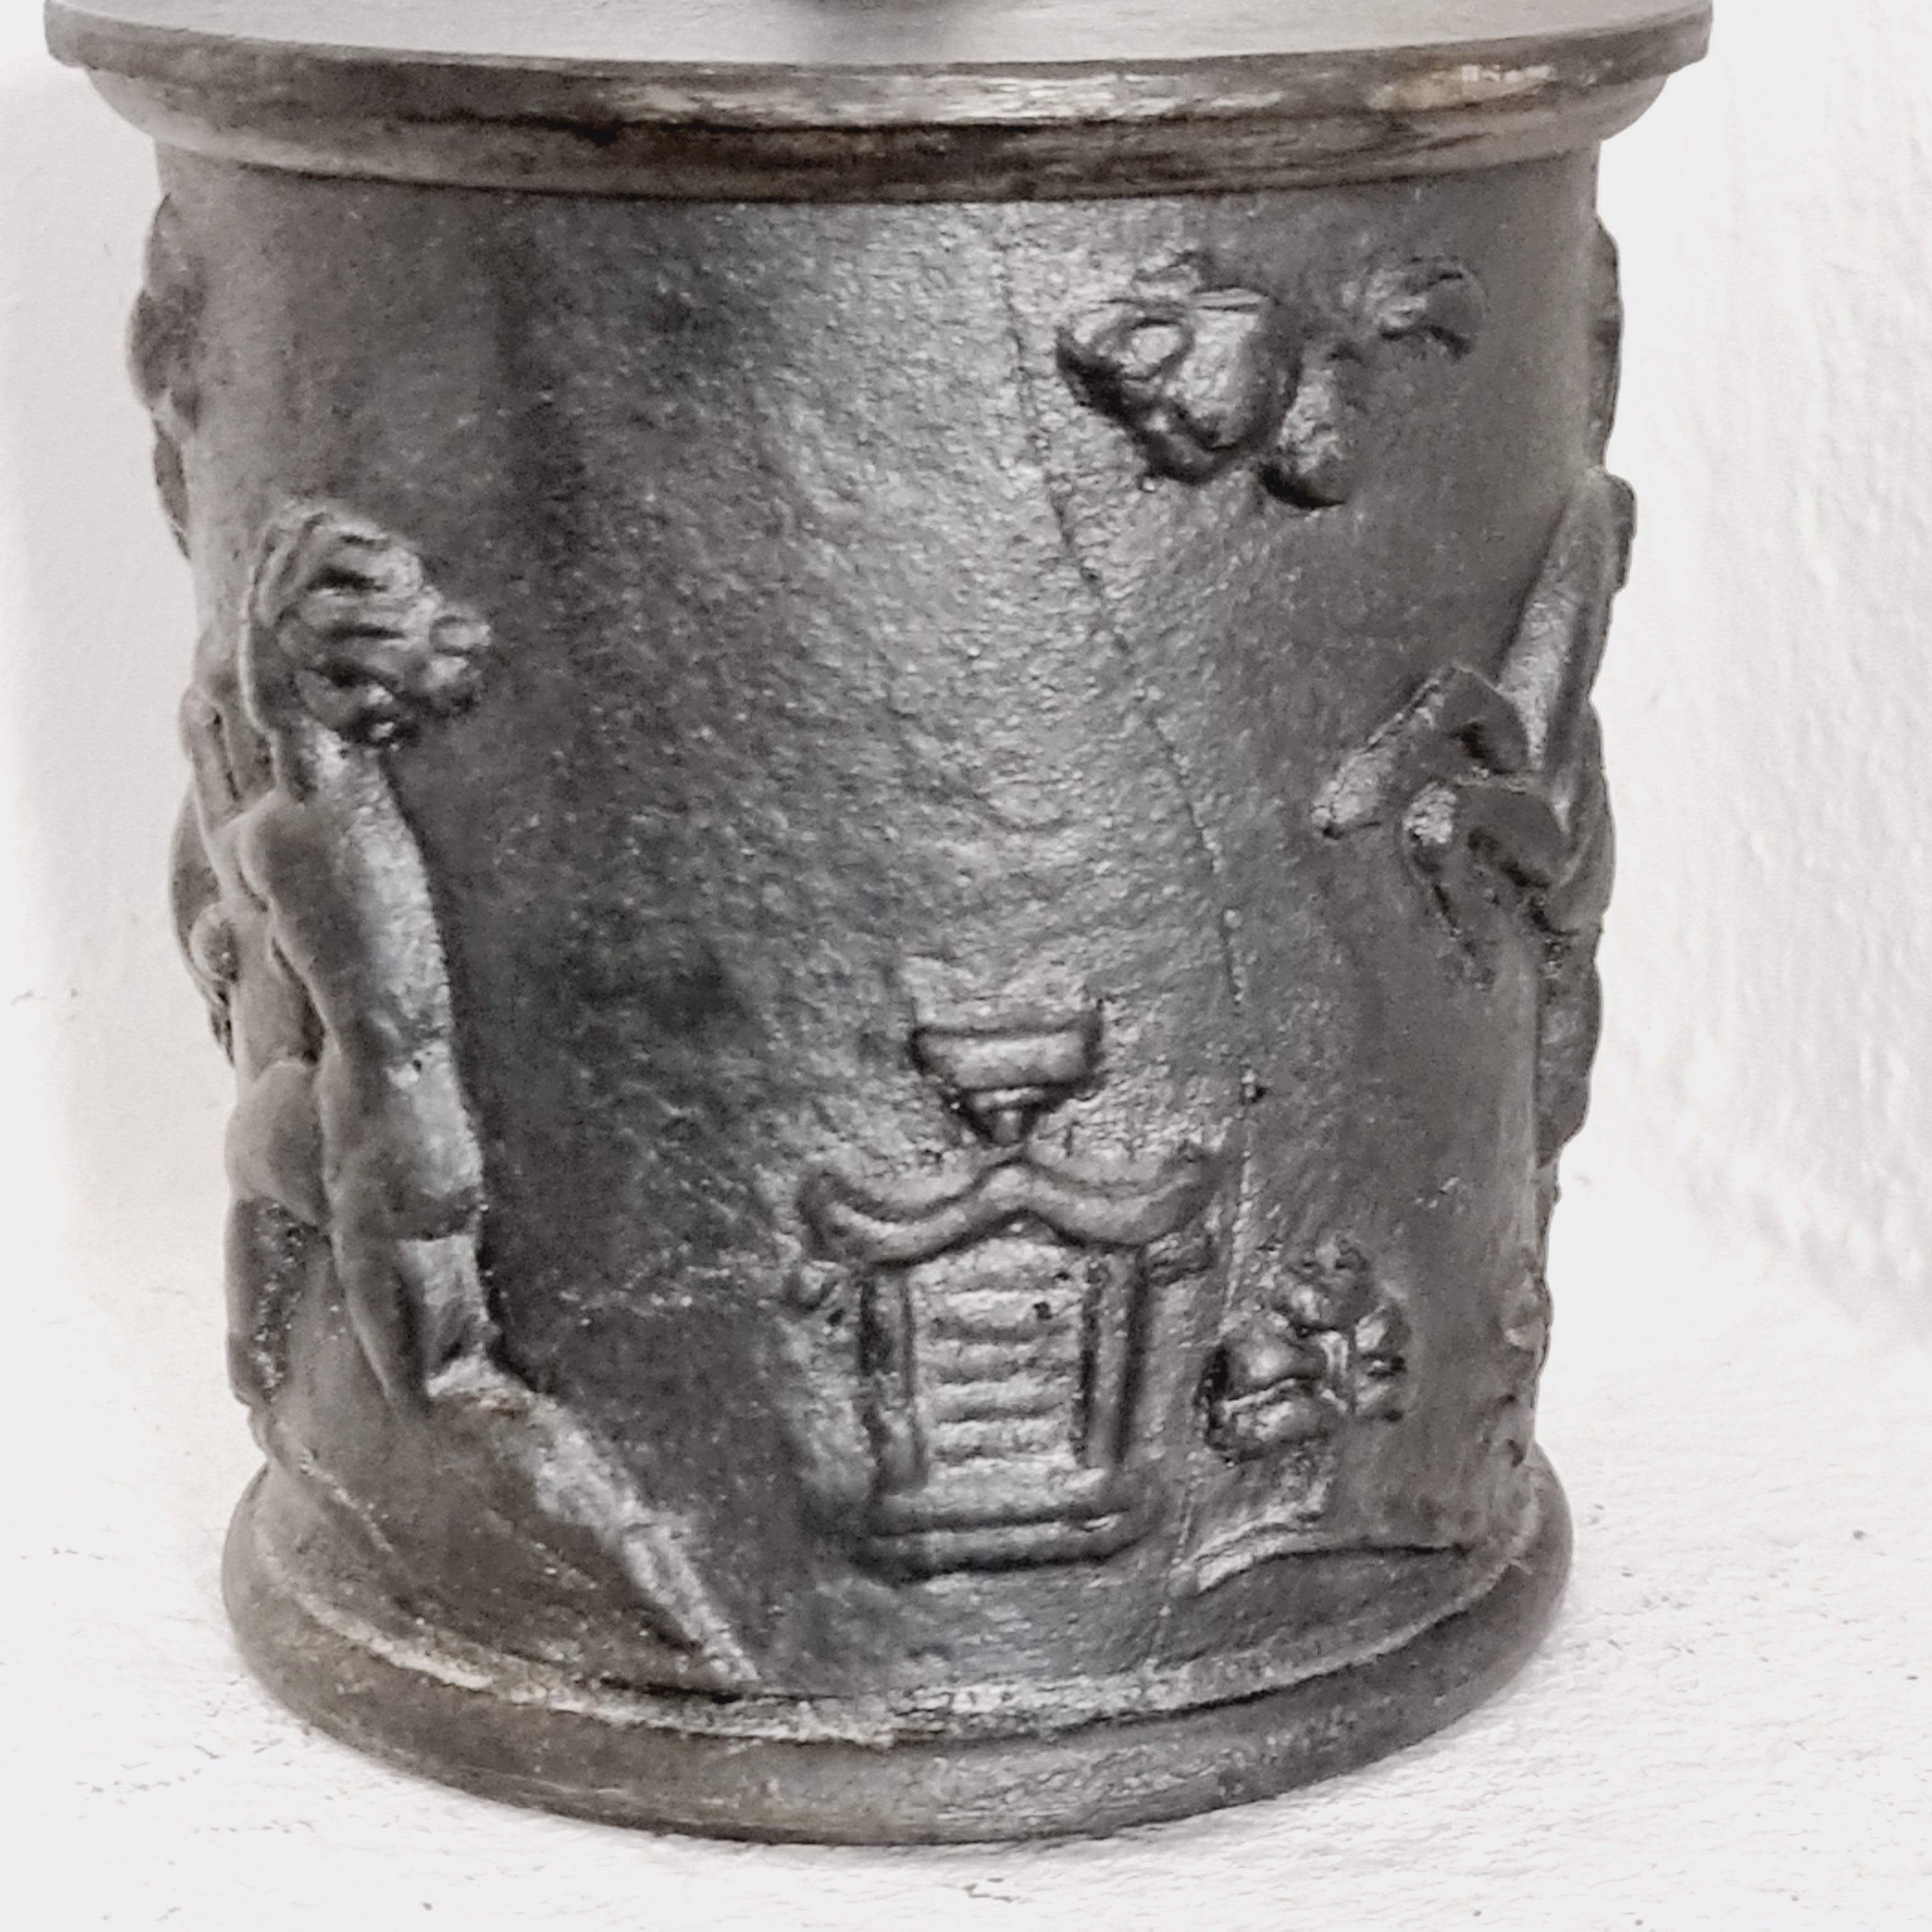 Decorative tobacco jar in cast iron with decor of animals and figures. Designed by Carl Elmberg for Näfveqvarns bruk, Swedish Grace, 1920s. 

Carl Elmberg (1889–1955) sculptor and craftsman. Worked after his studies in Germany and Italy with the